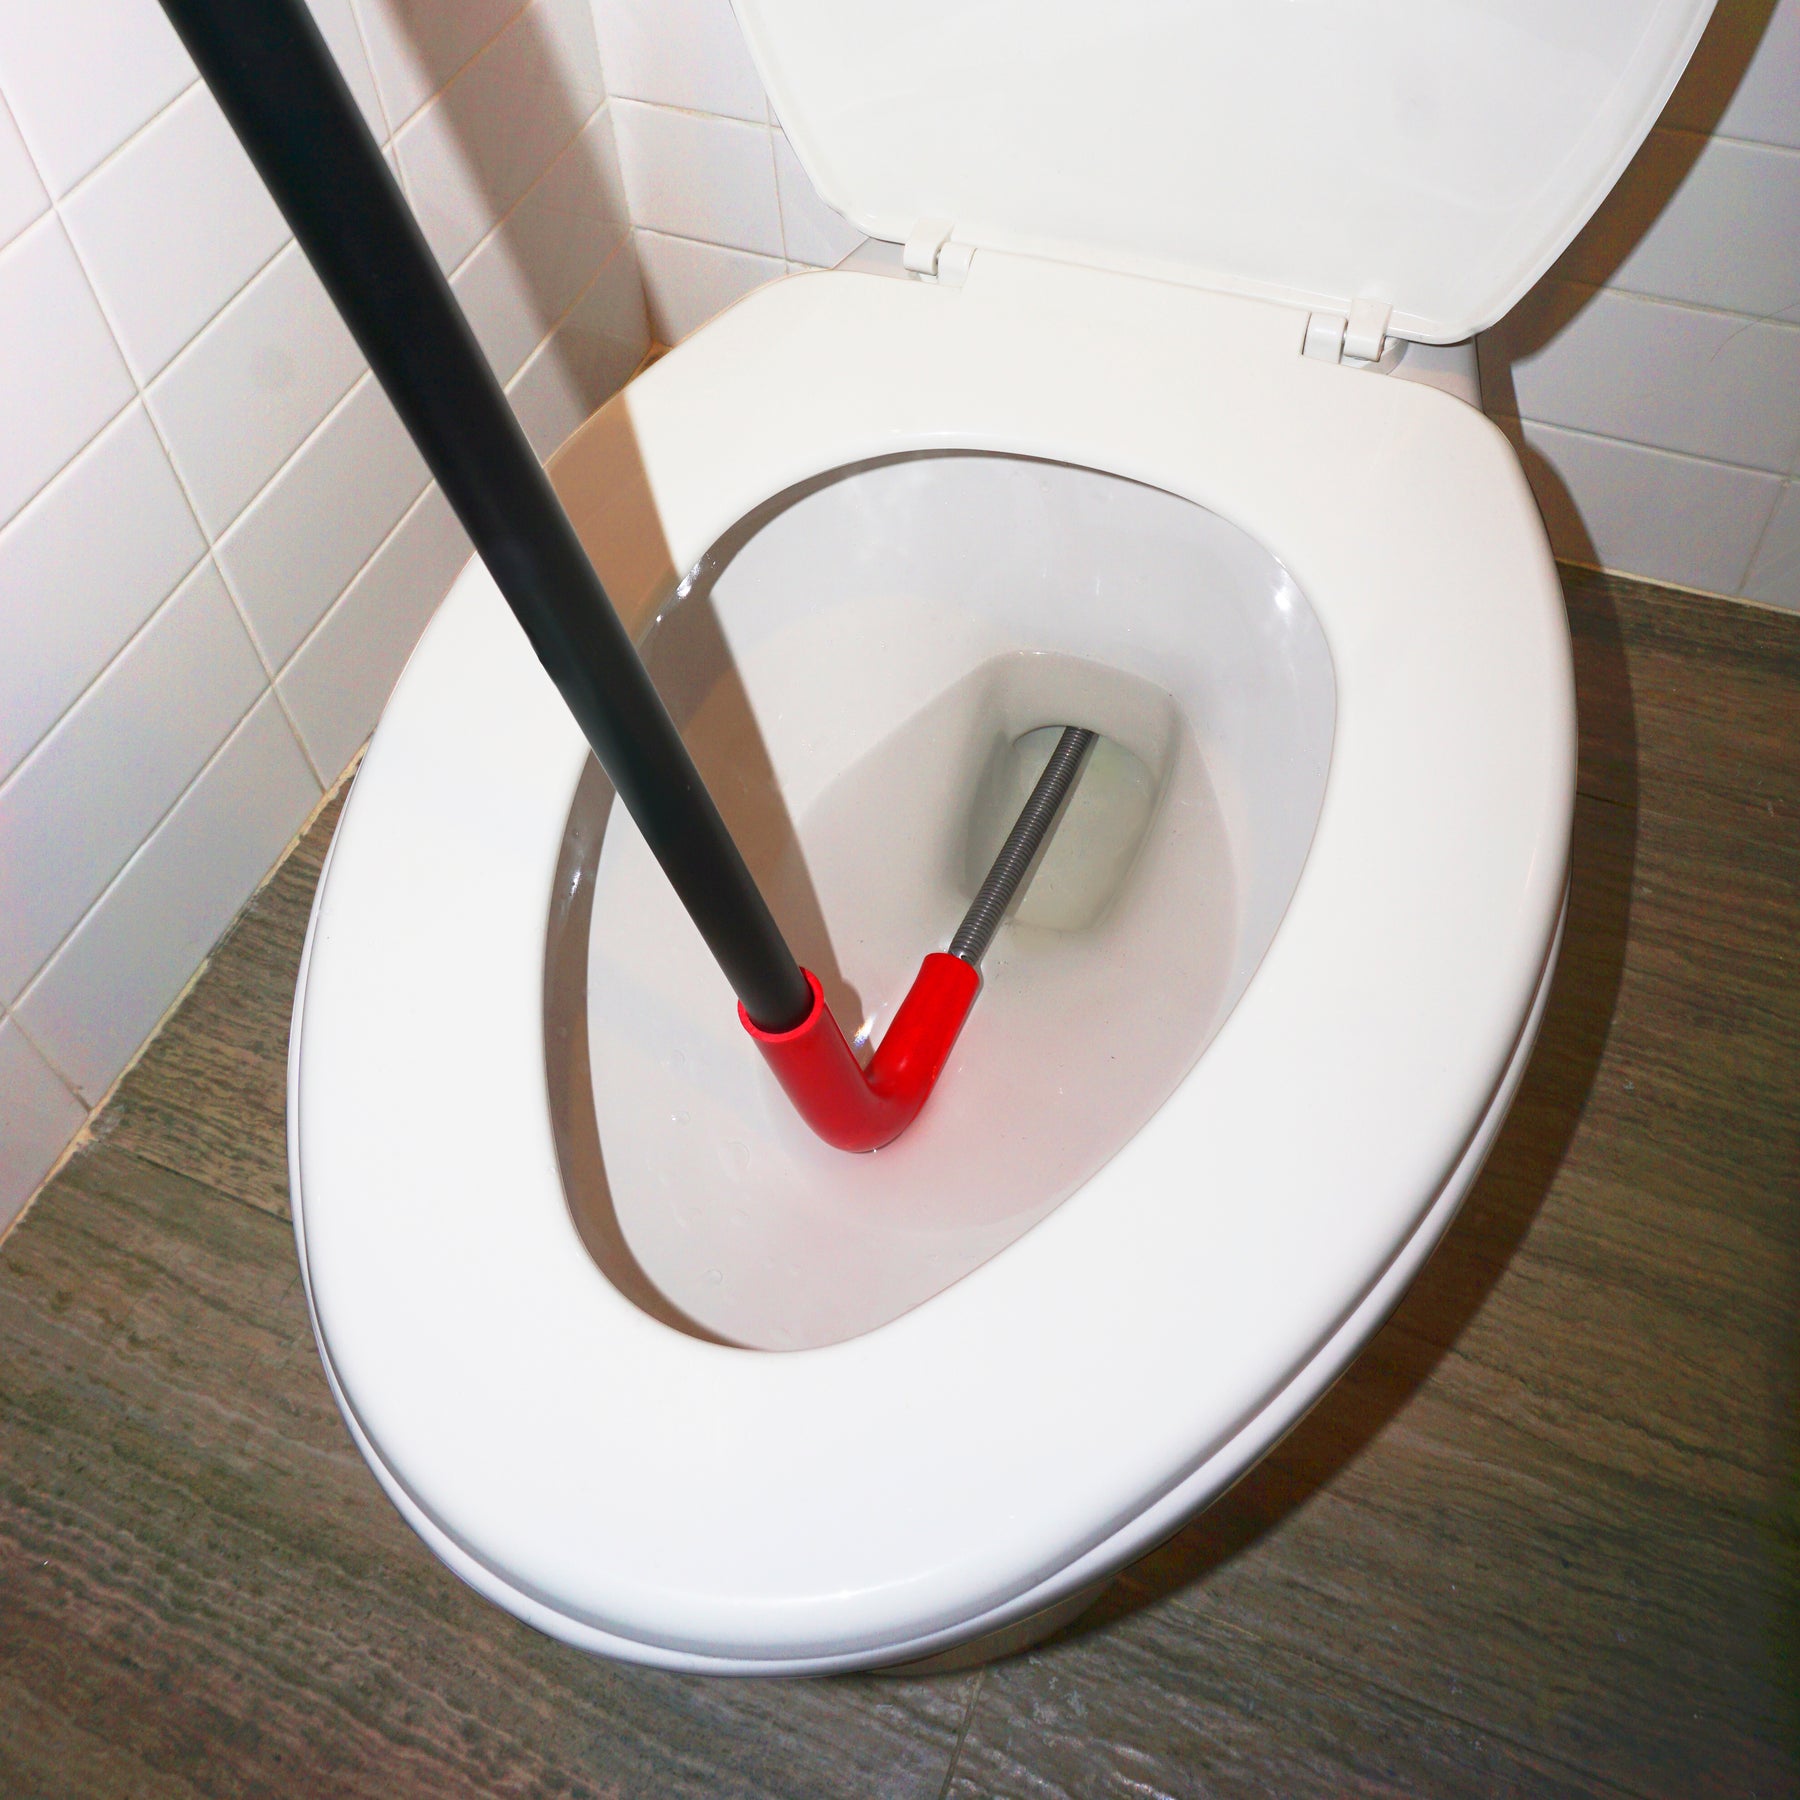 Drainx 6 Foot Toilet Auger | Use manually or with Drill, Closet Auger Drain Plu